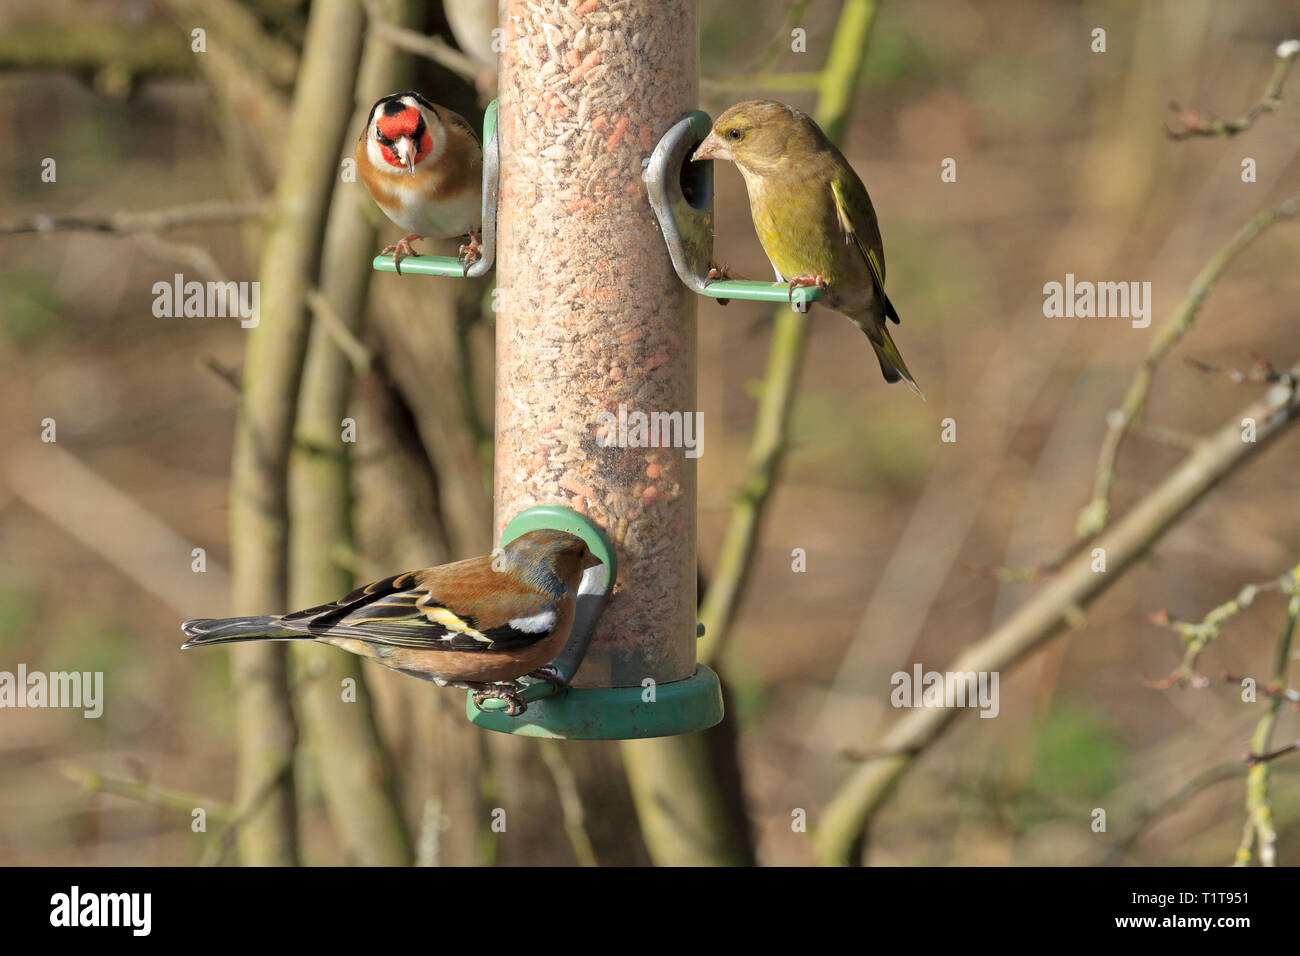 Greenfinch, Carduelis chloris goldfinch, Carduelis carduel and chaffinch, Fringilla coelebs at RSPB reserve Fairburn Ings, West Yorkshire, England. Stock Photo